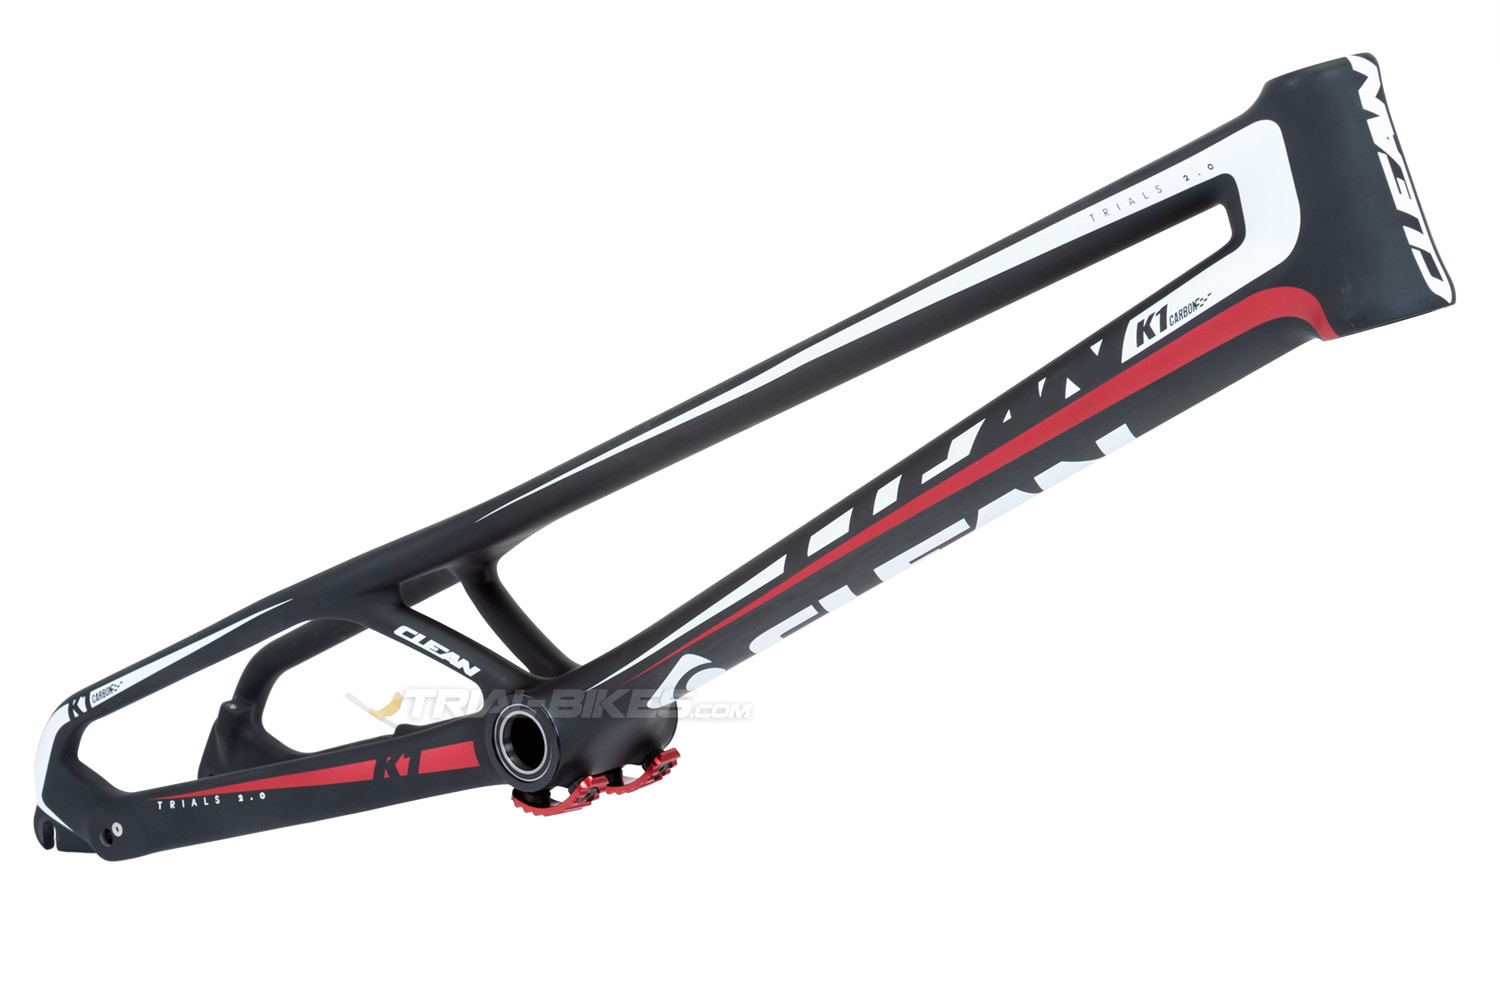 trials bicycle frame